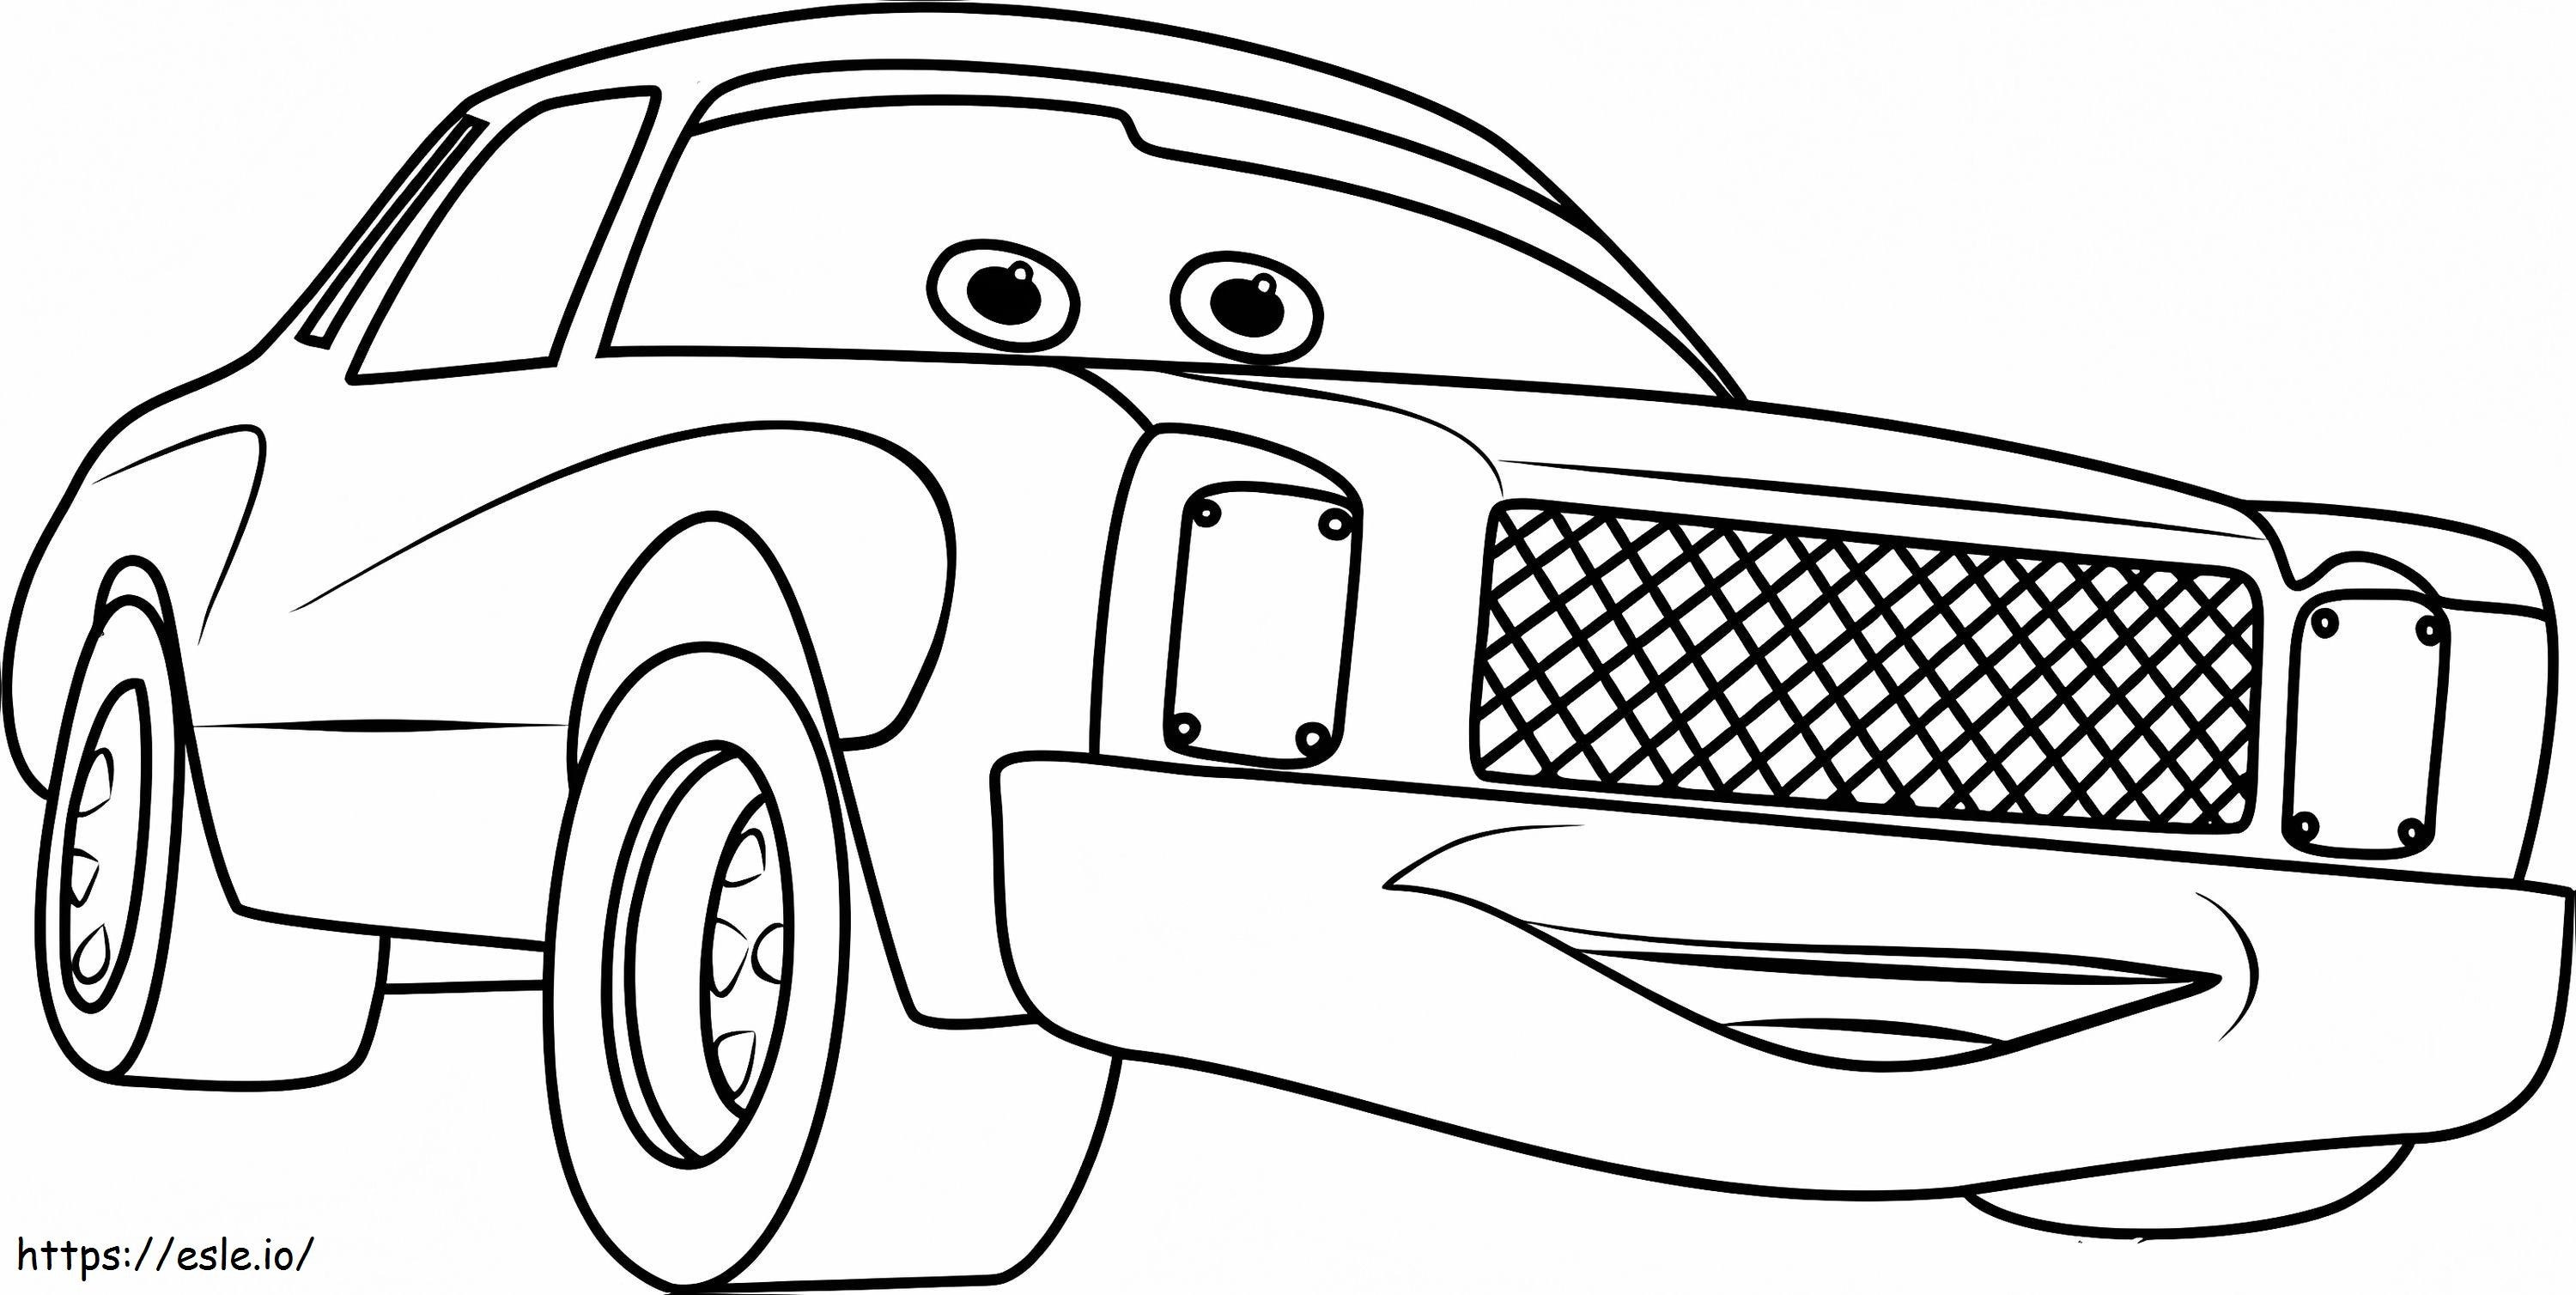 Happy Darrell Cartrip coloring page